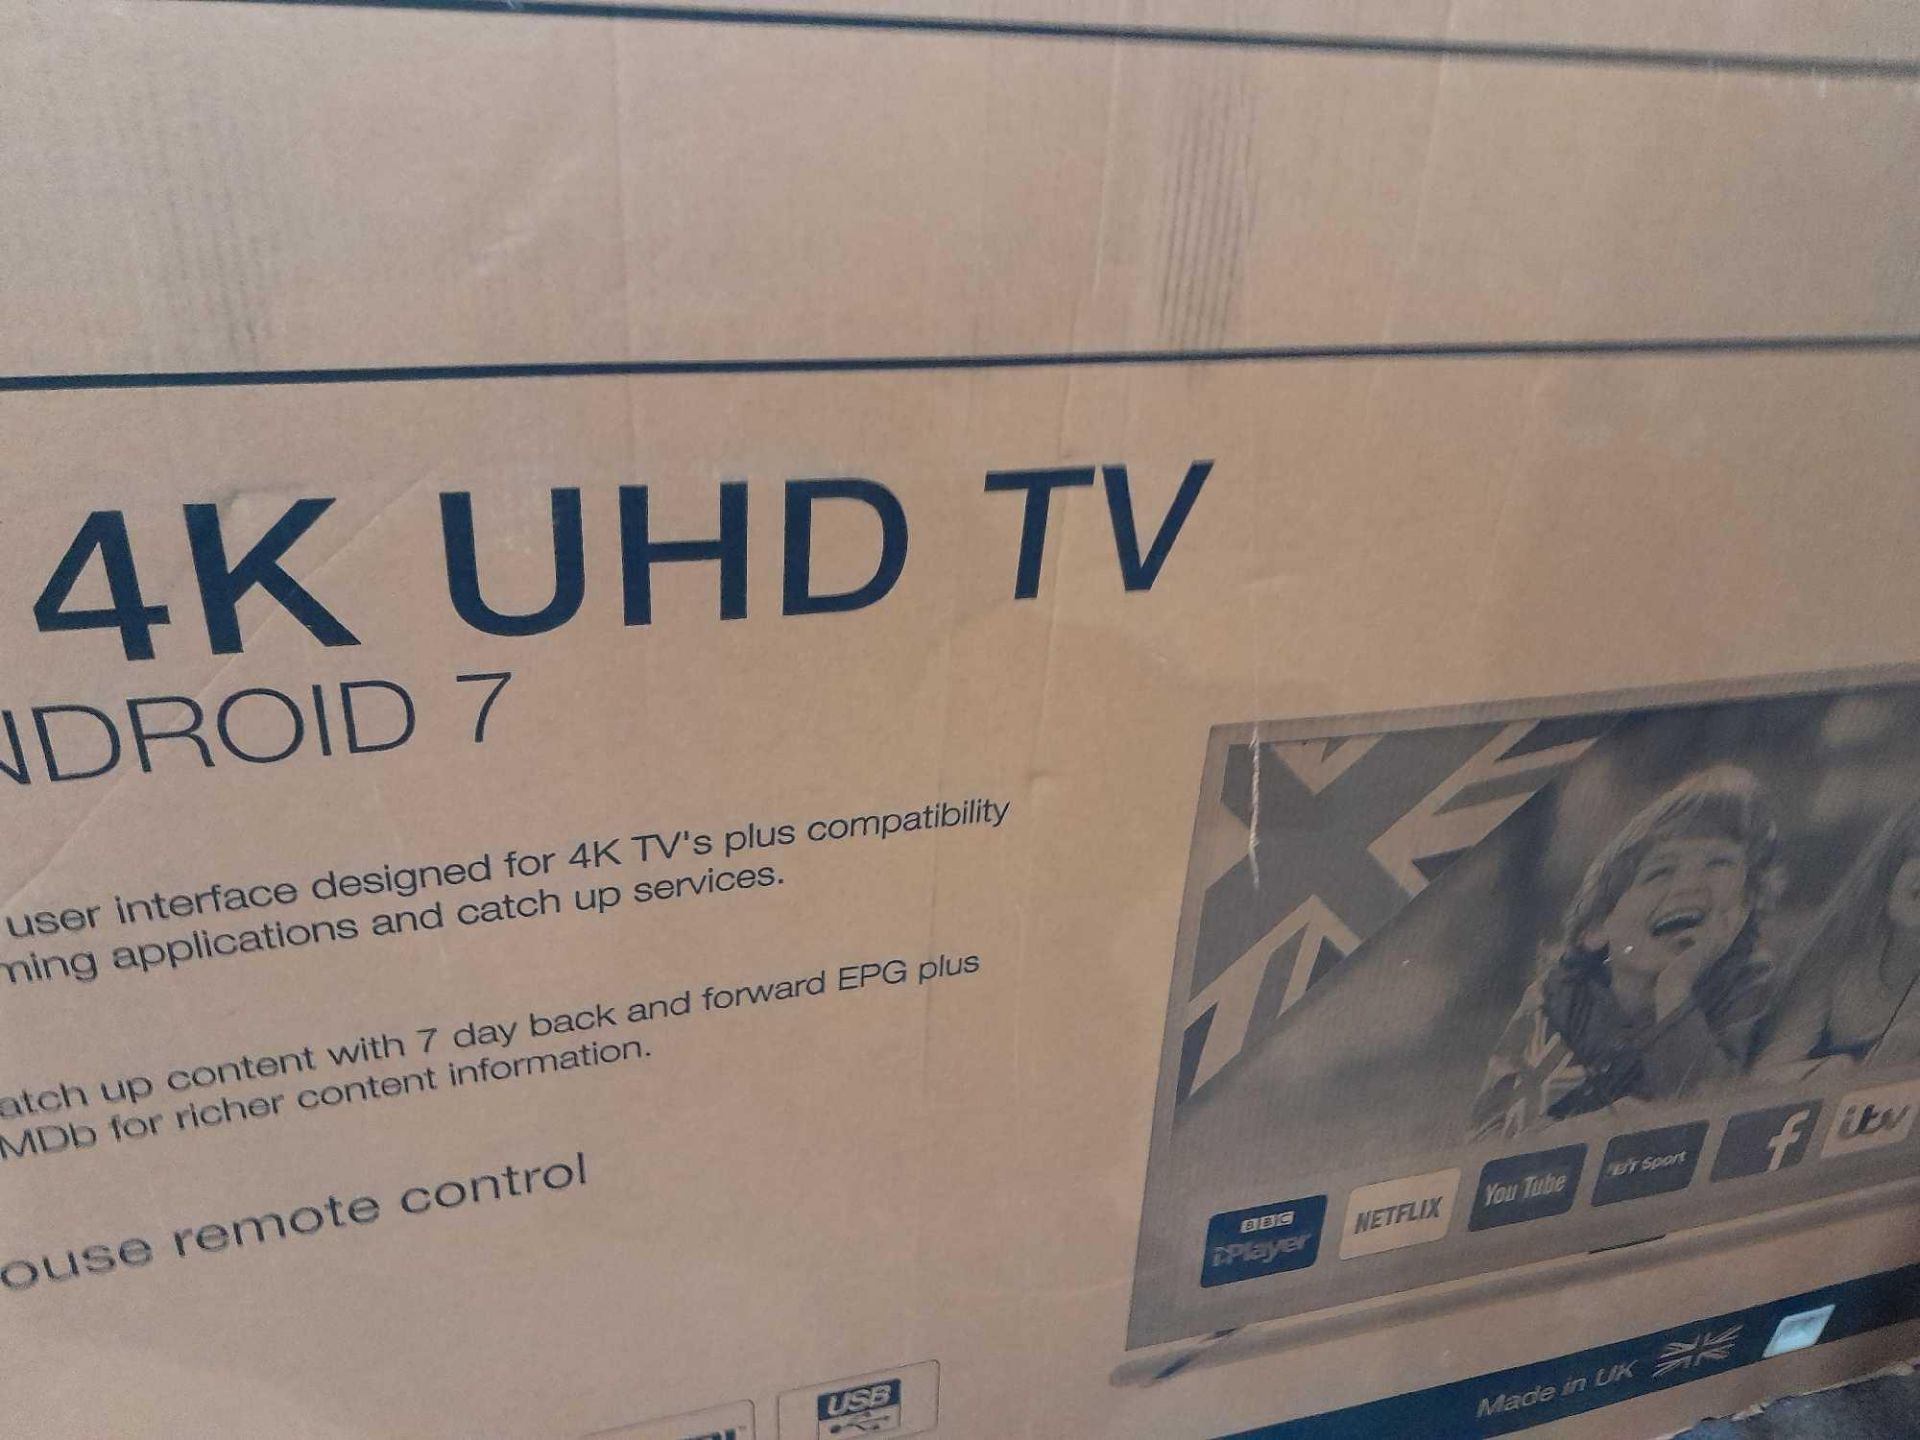 RRP £1500 Boxed Cello C75Sfs4K 75" Smart 4K Uhd Android Superfast Tv - Image 2 of 2